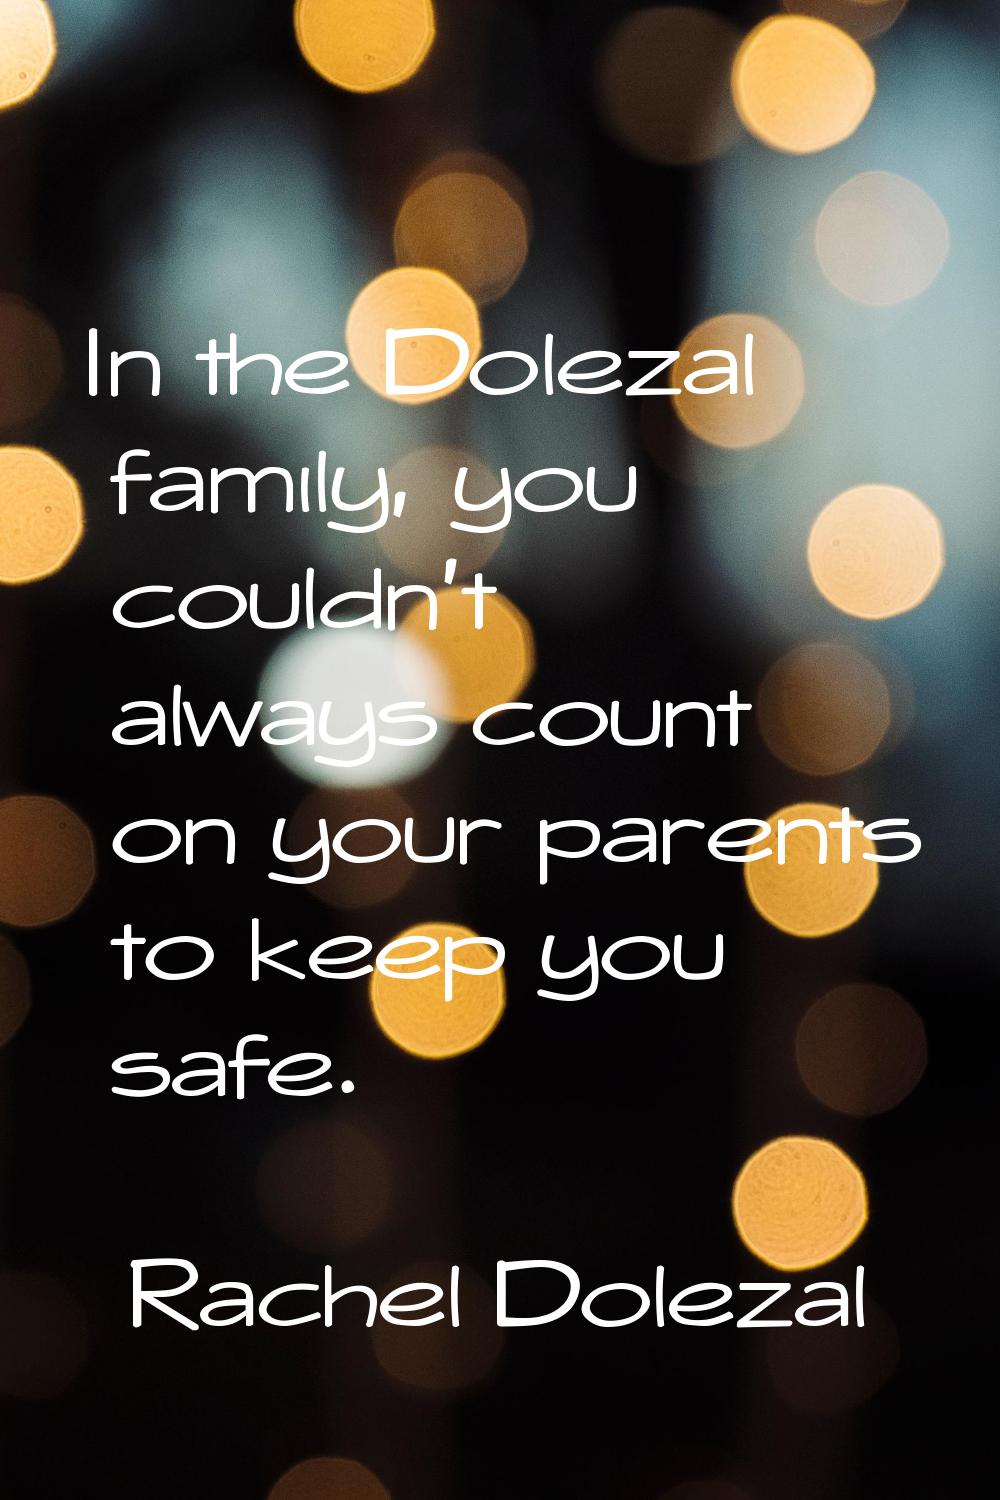 In the Dolezal family, you couldn't always count on your parents to keep you safe.